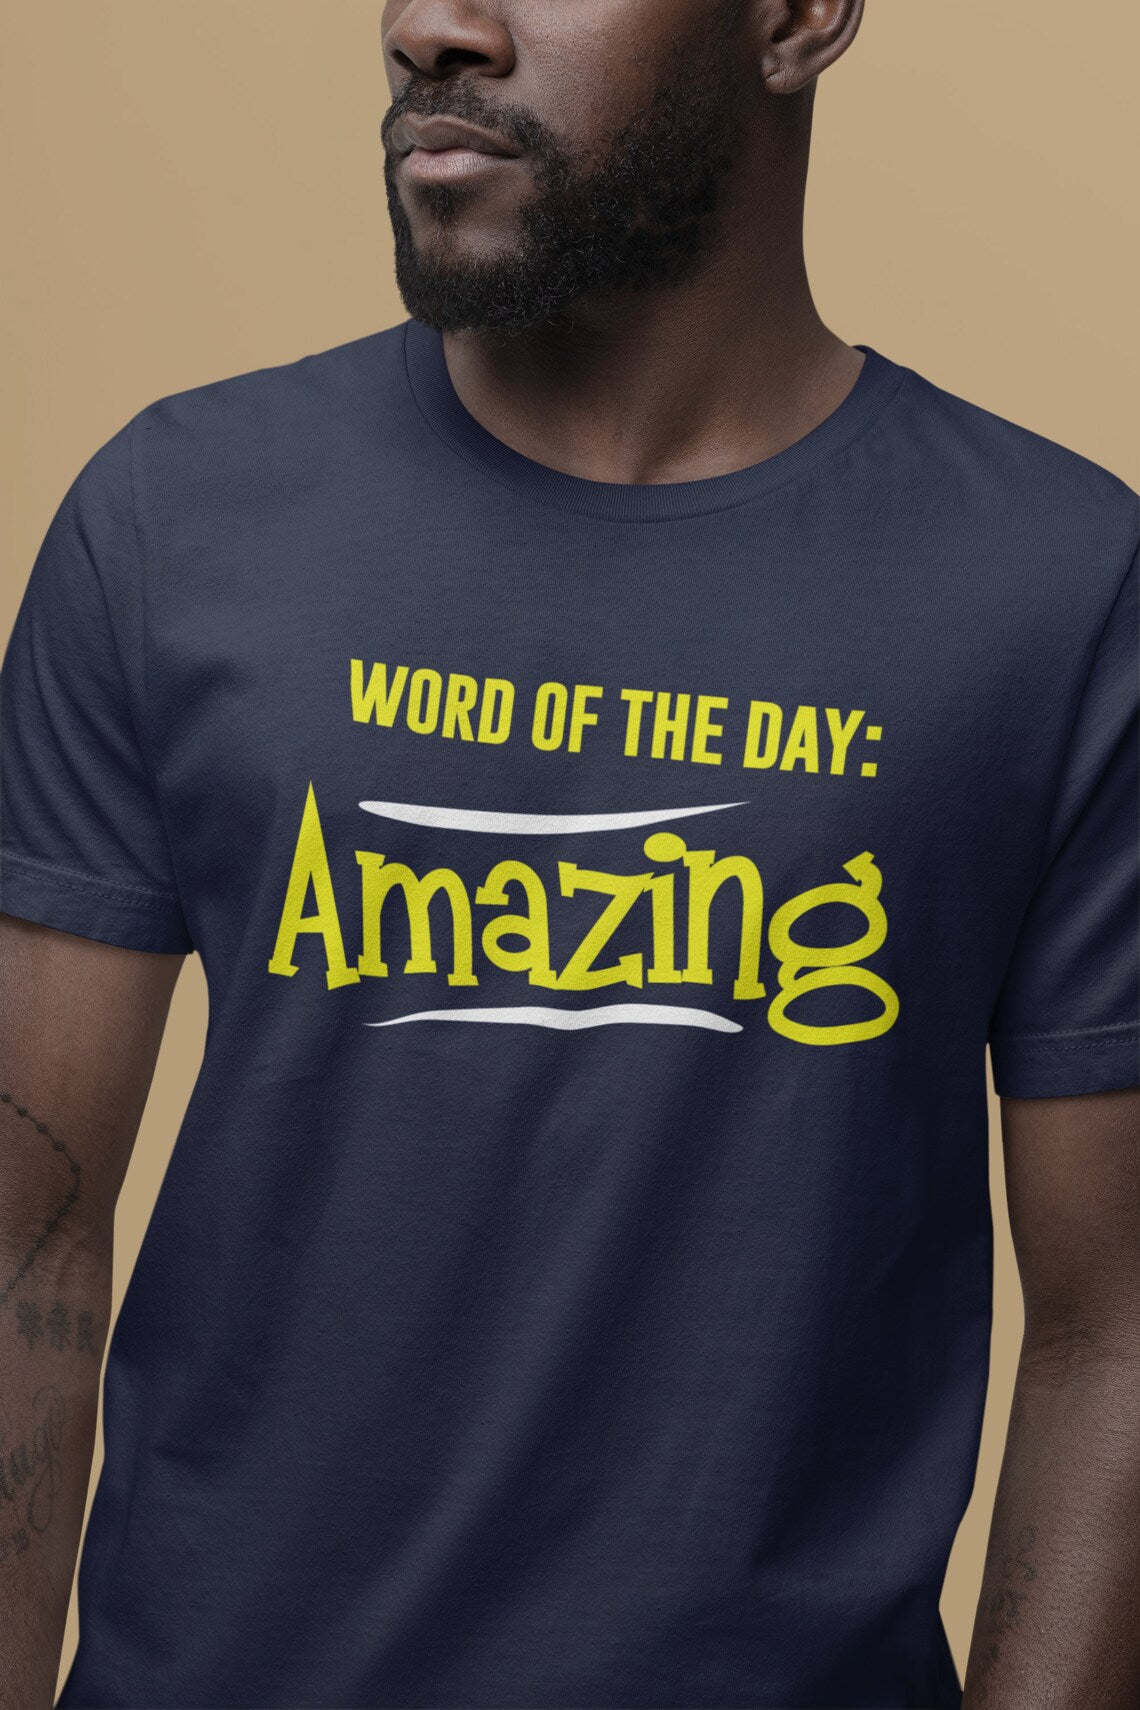 Word Of The Day Amazing Men's Jersey Curved Hem Tee, Amazing shirts, Inspirational shirts, Motivational Shirts, Positive shirts, Trendy tees